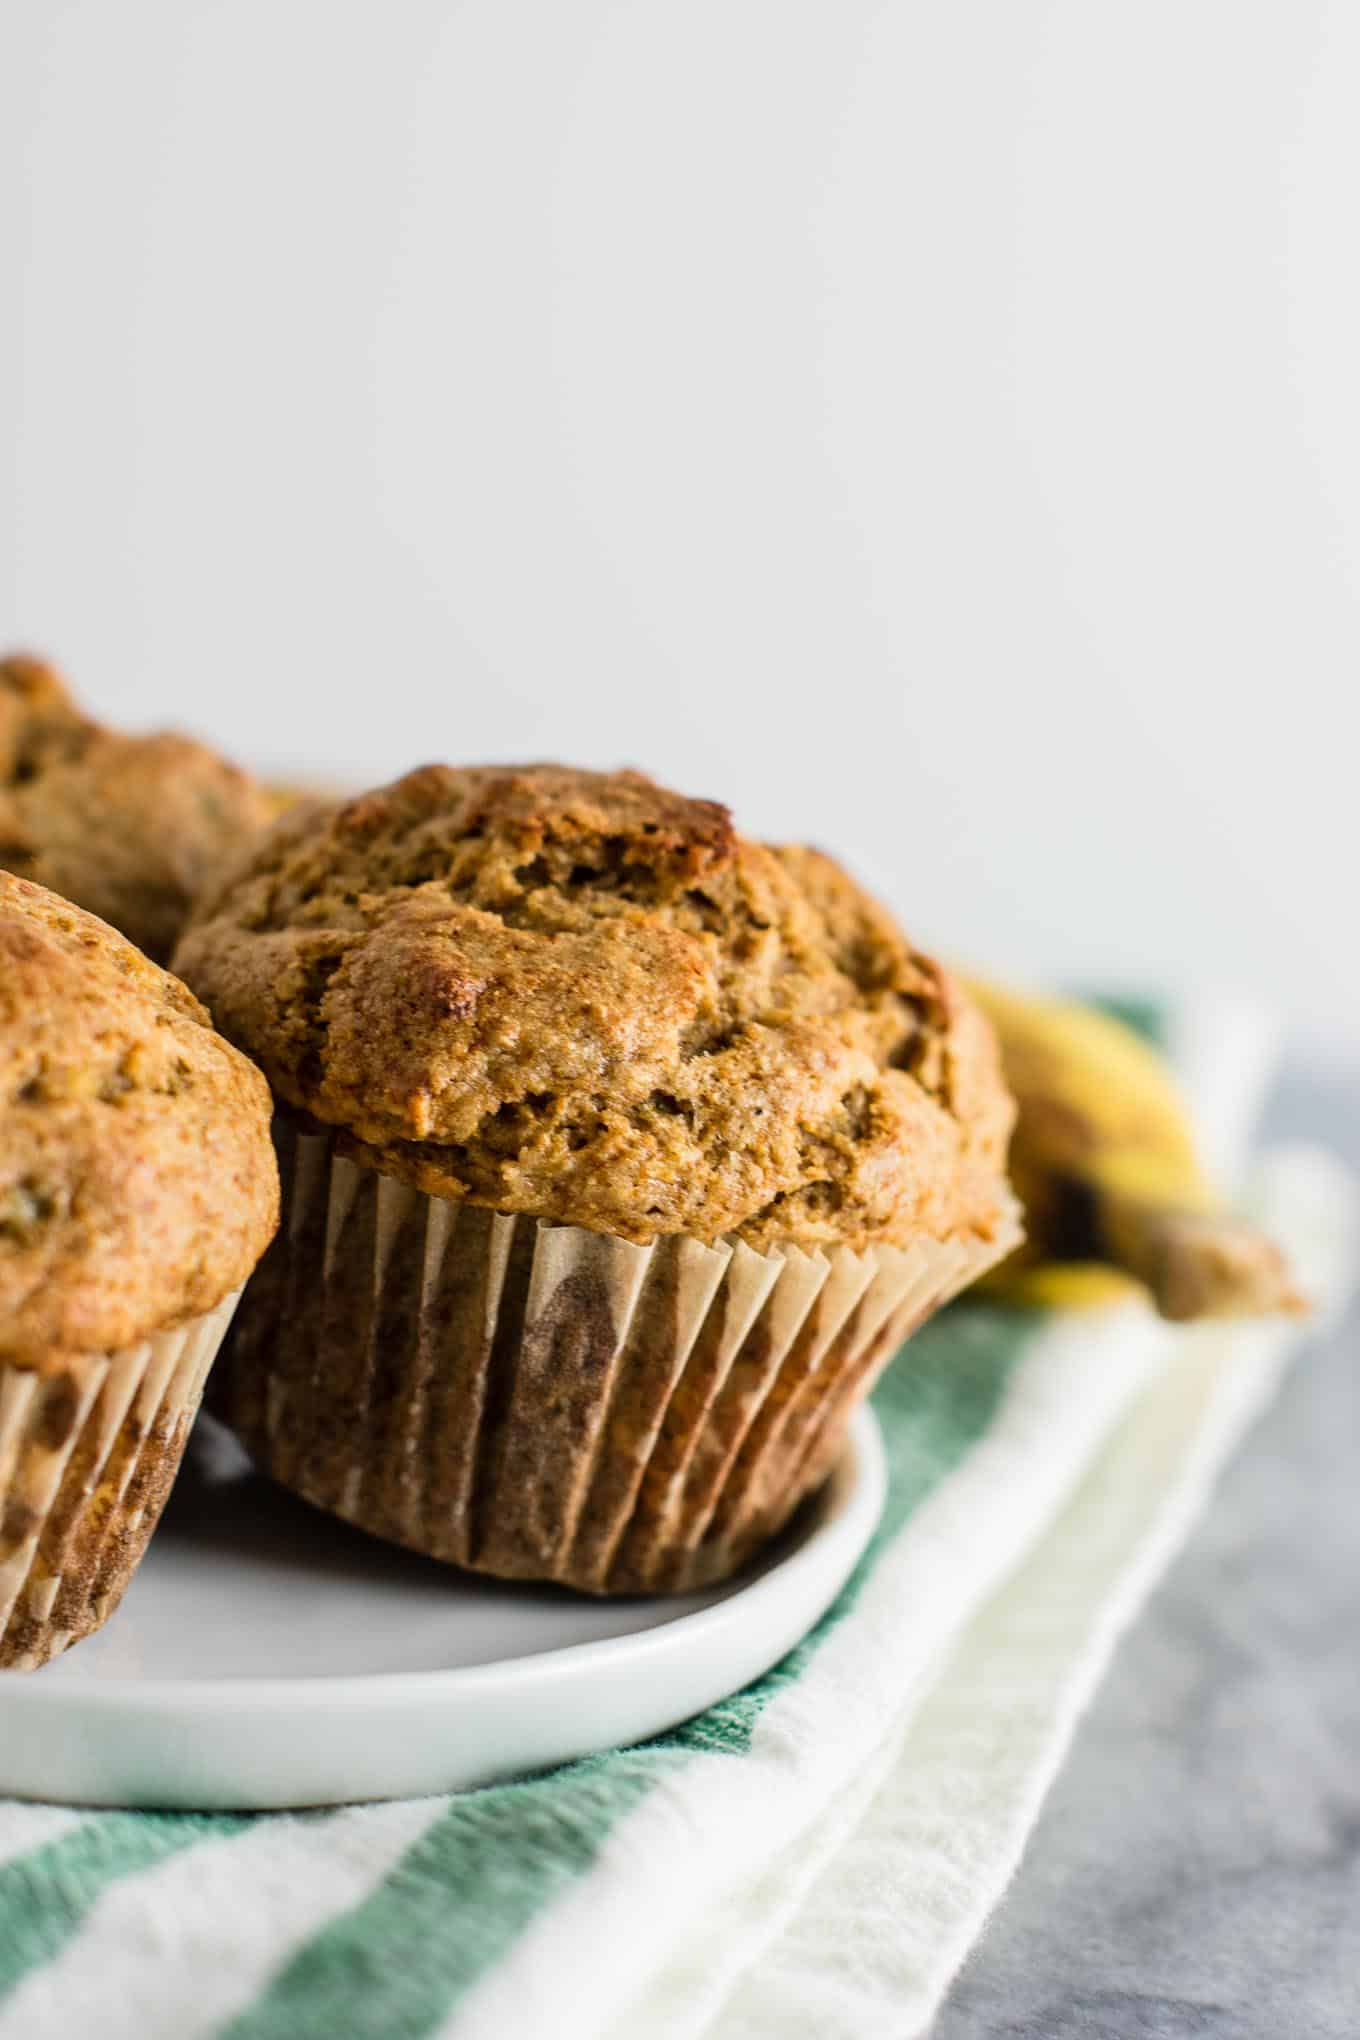 Whole Wheat Banana Bread Muffins Recipe (naturally sweetened) A wholesome snack or breakfast that both kids and adults will love! #wholewheat #bananabreadmuffins #healthybreakfast #muffins #bananabread